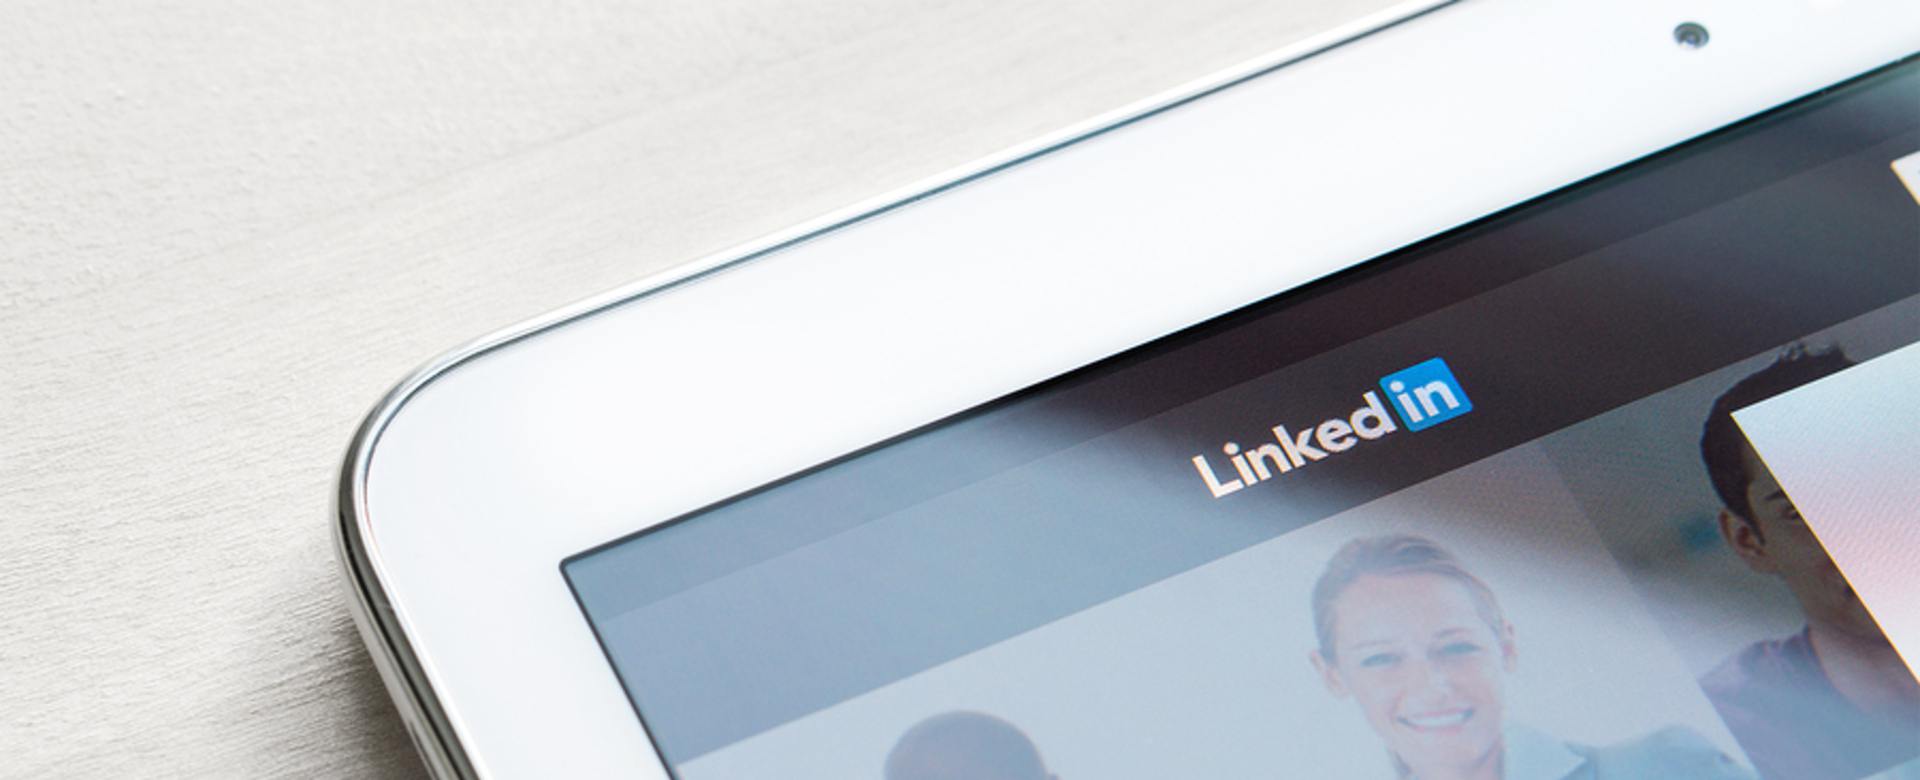 Tablet with LinkedIn page on screen.